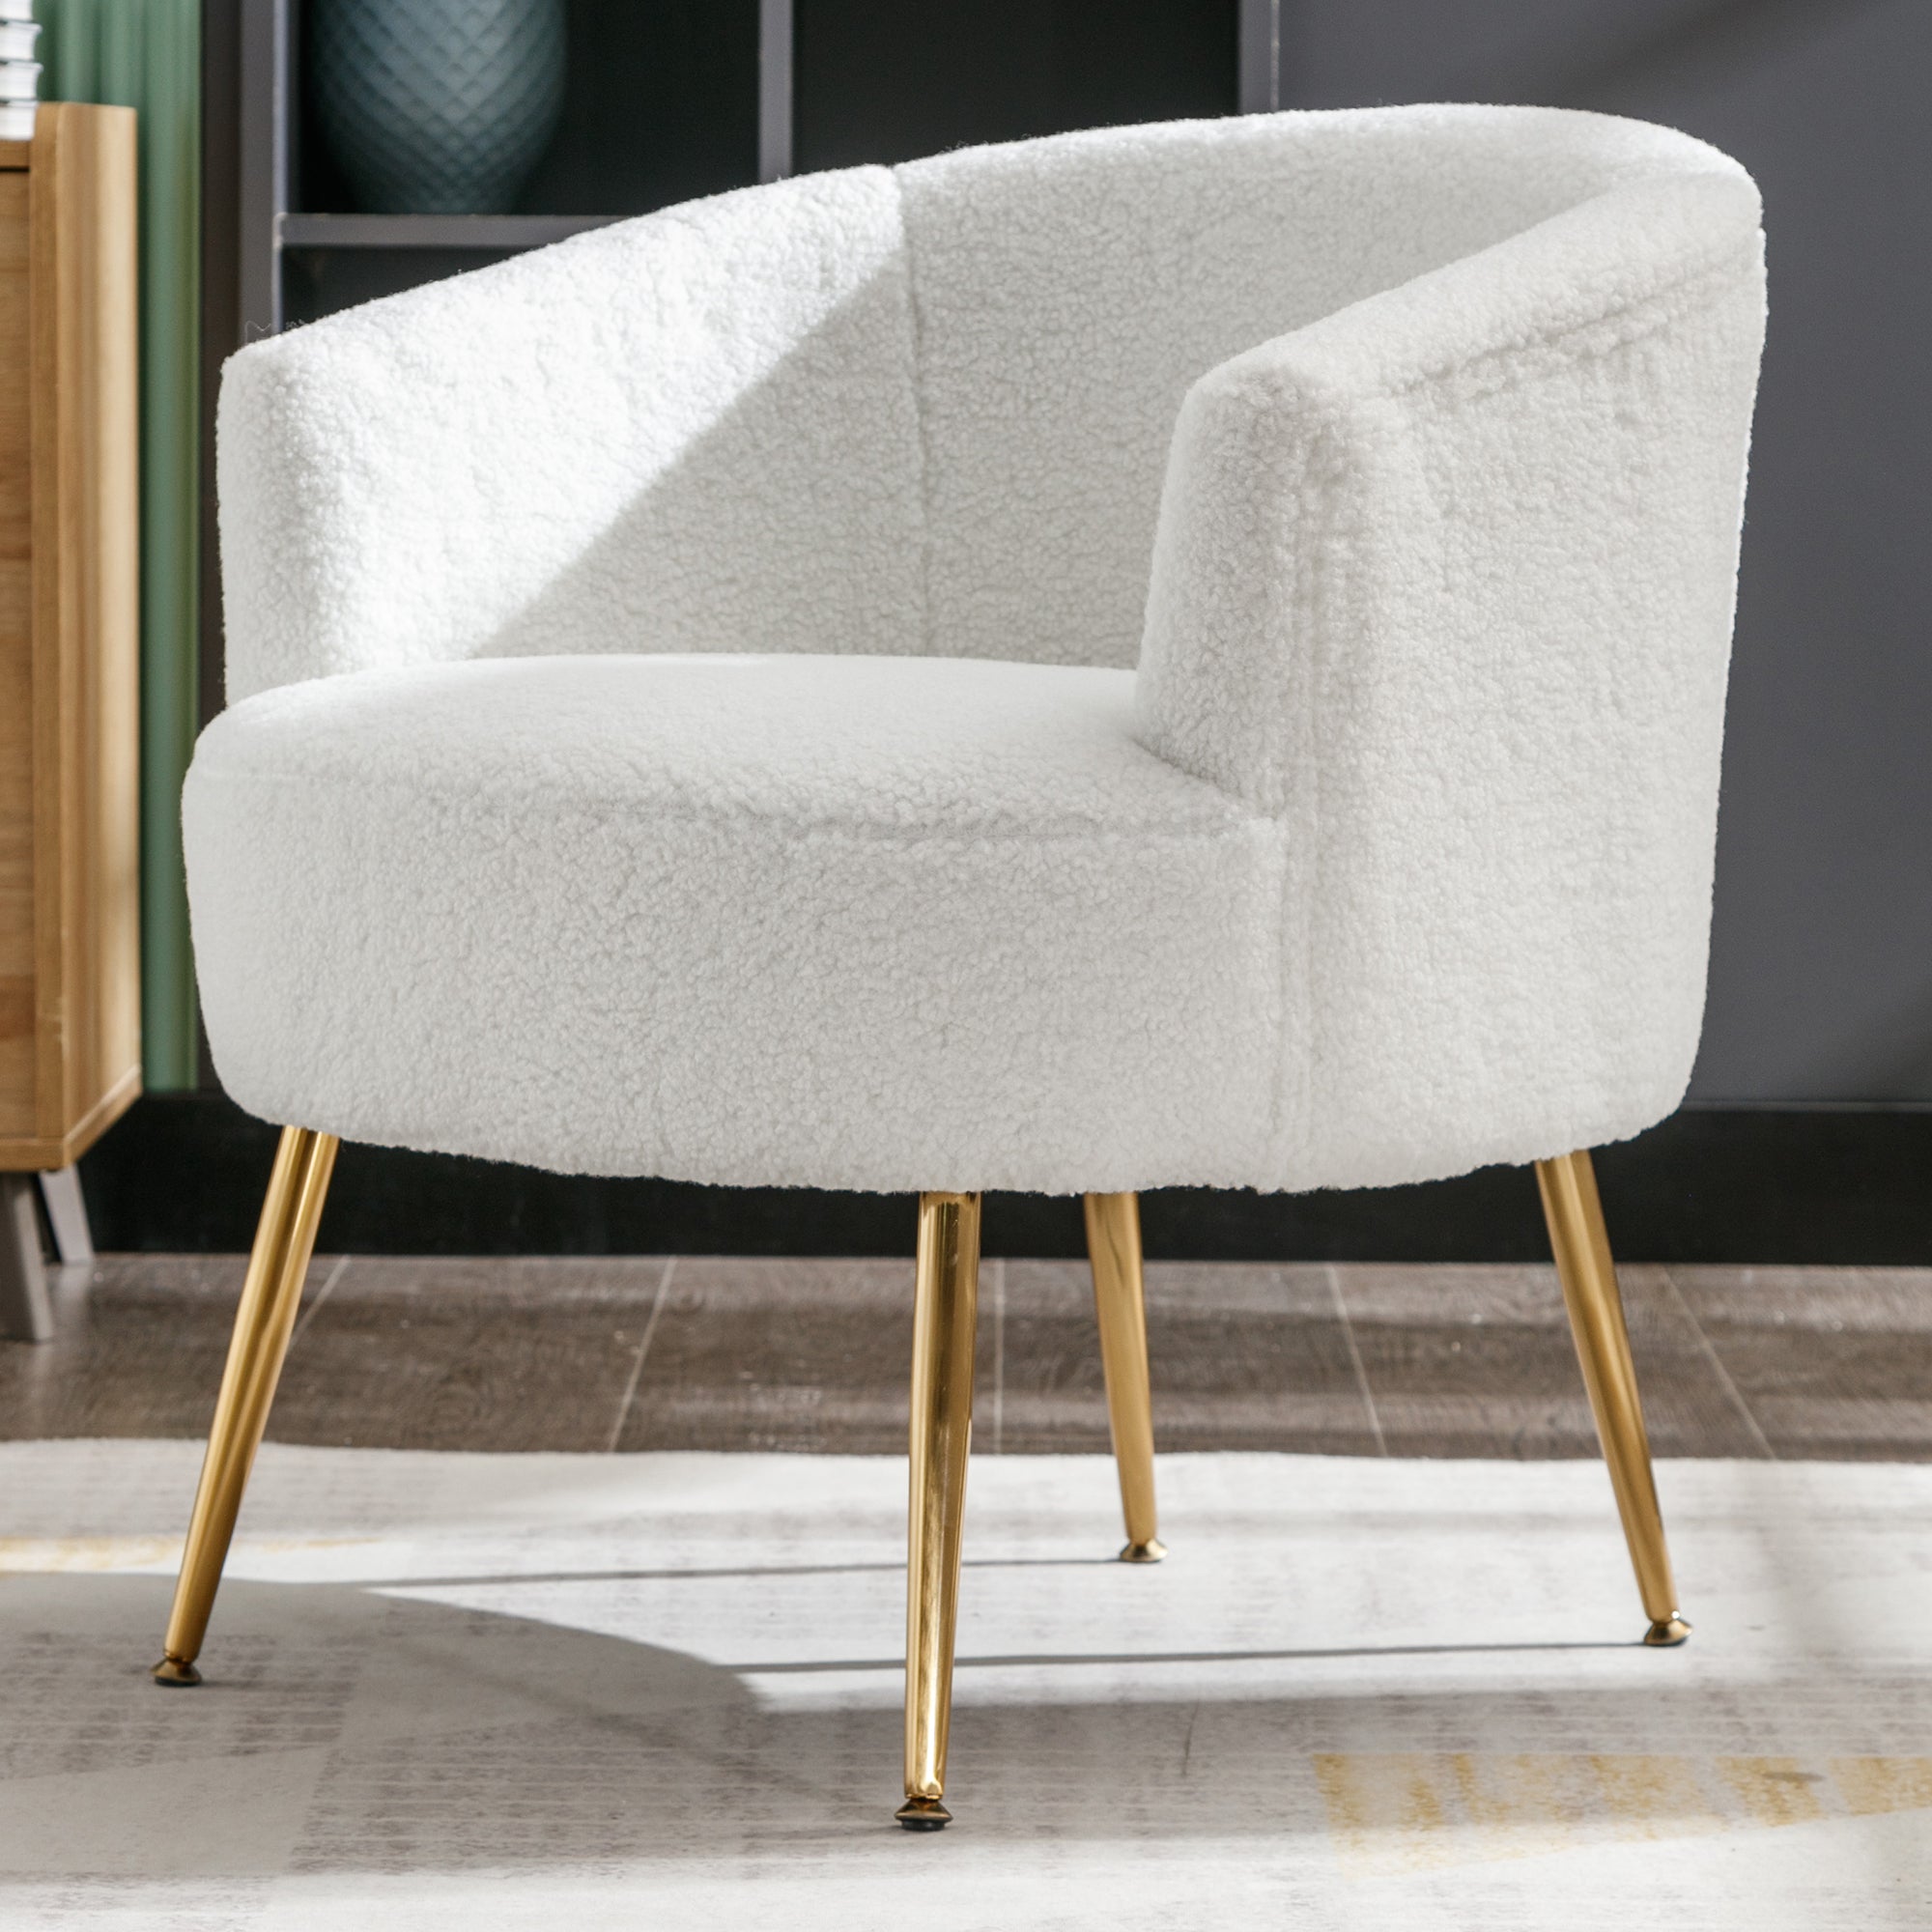 ZNTS Teddy Fabric Armchair Accent Tub Barrel Chair With Gold Metal Legs,White W52780896